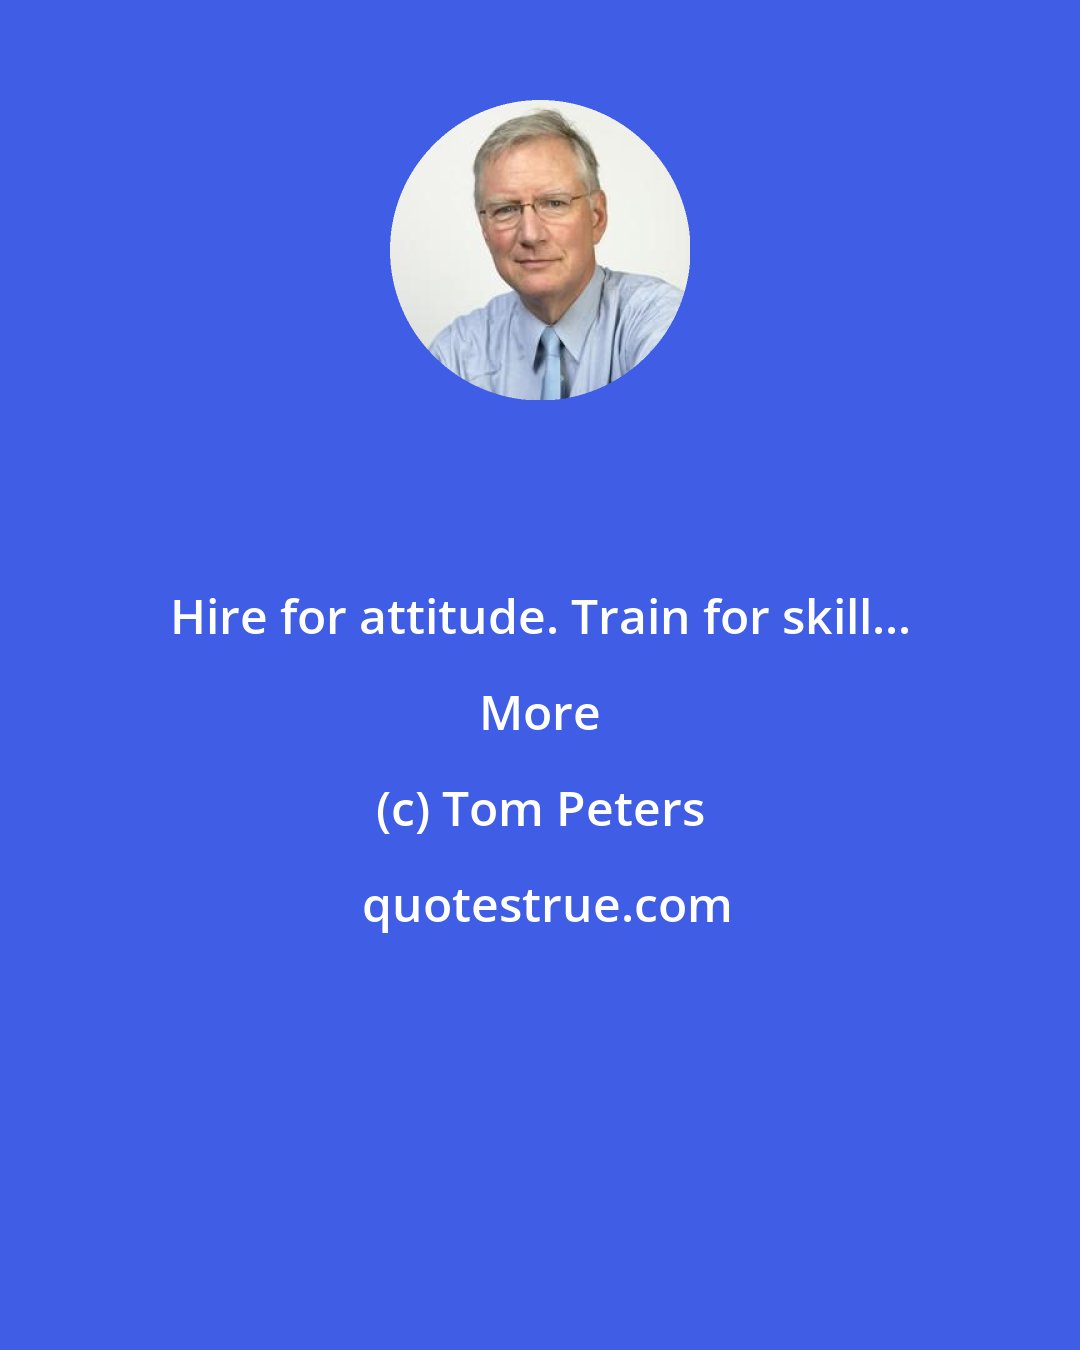 Tom Peters: Hire for attitude. Train for skill... More